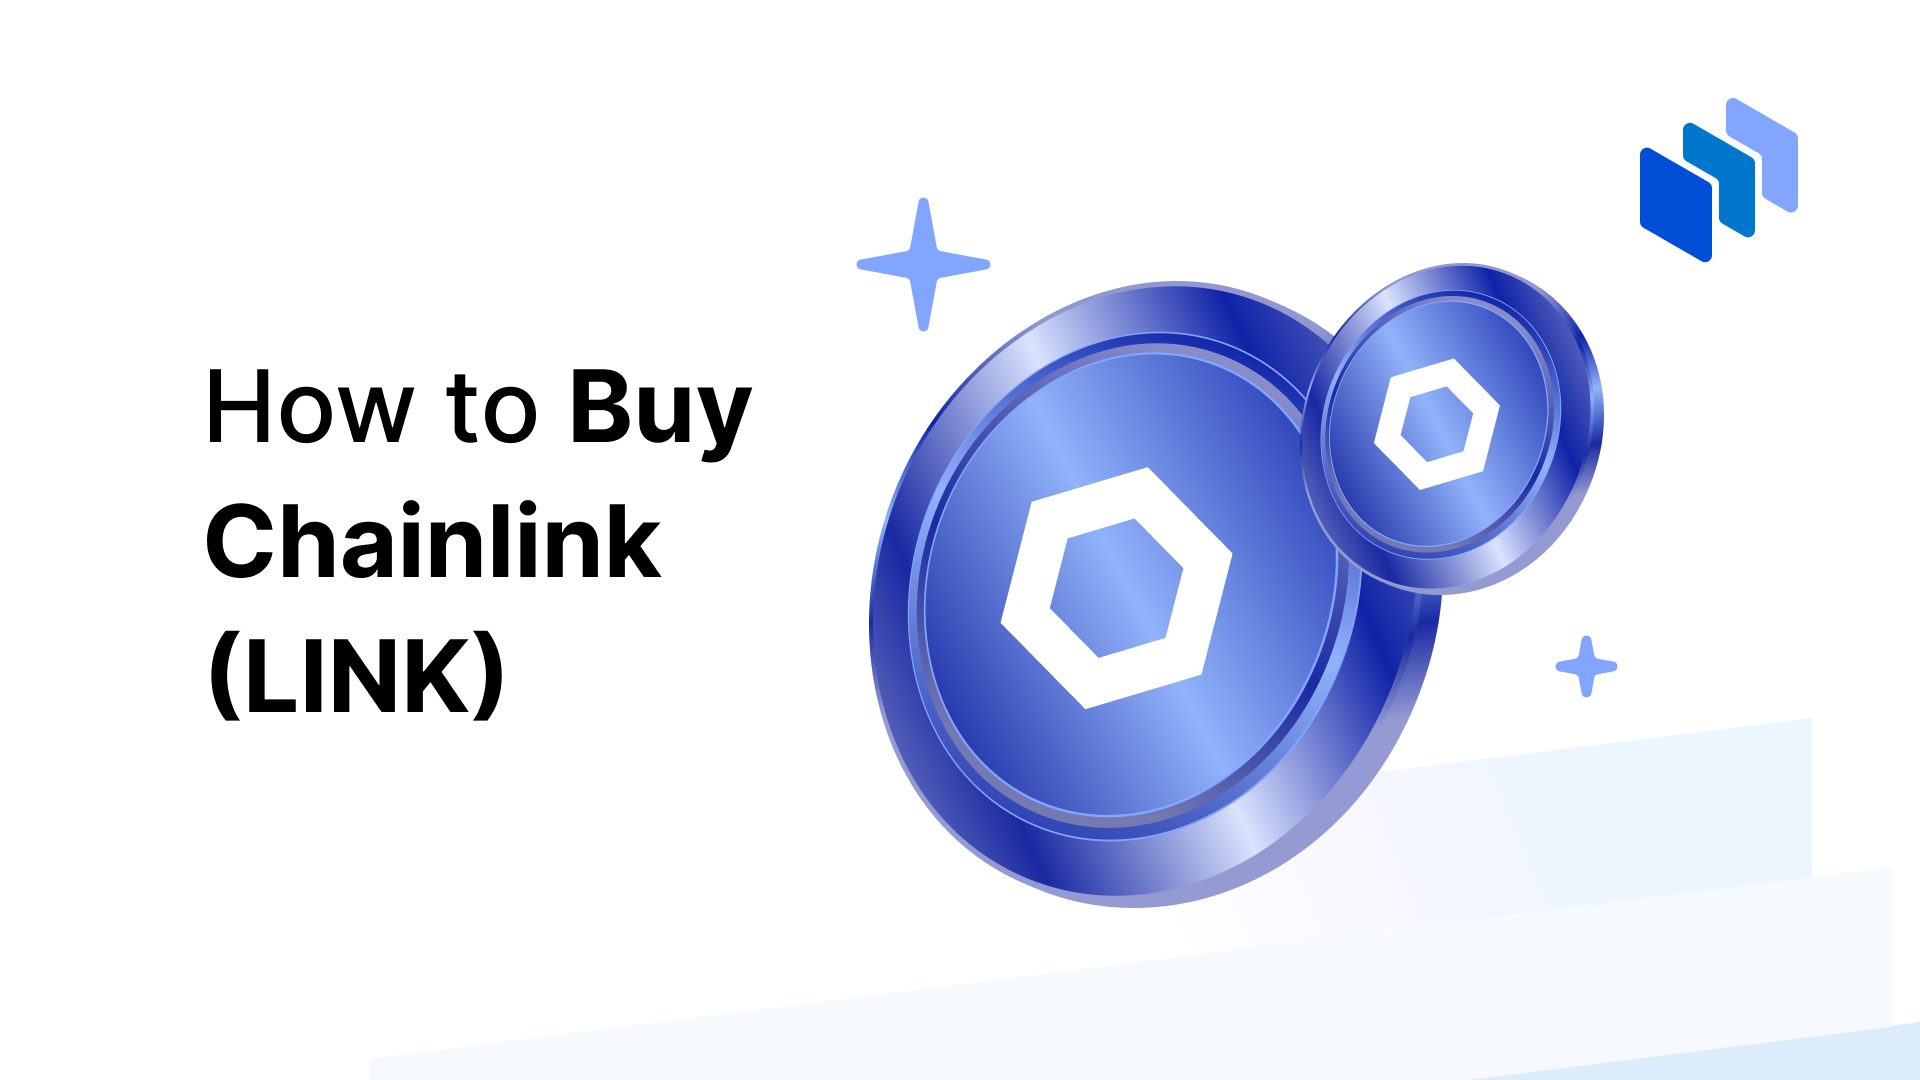 How to Buy Chainlink (LINK)